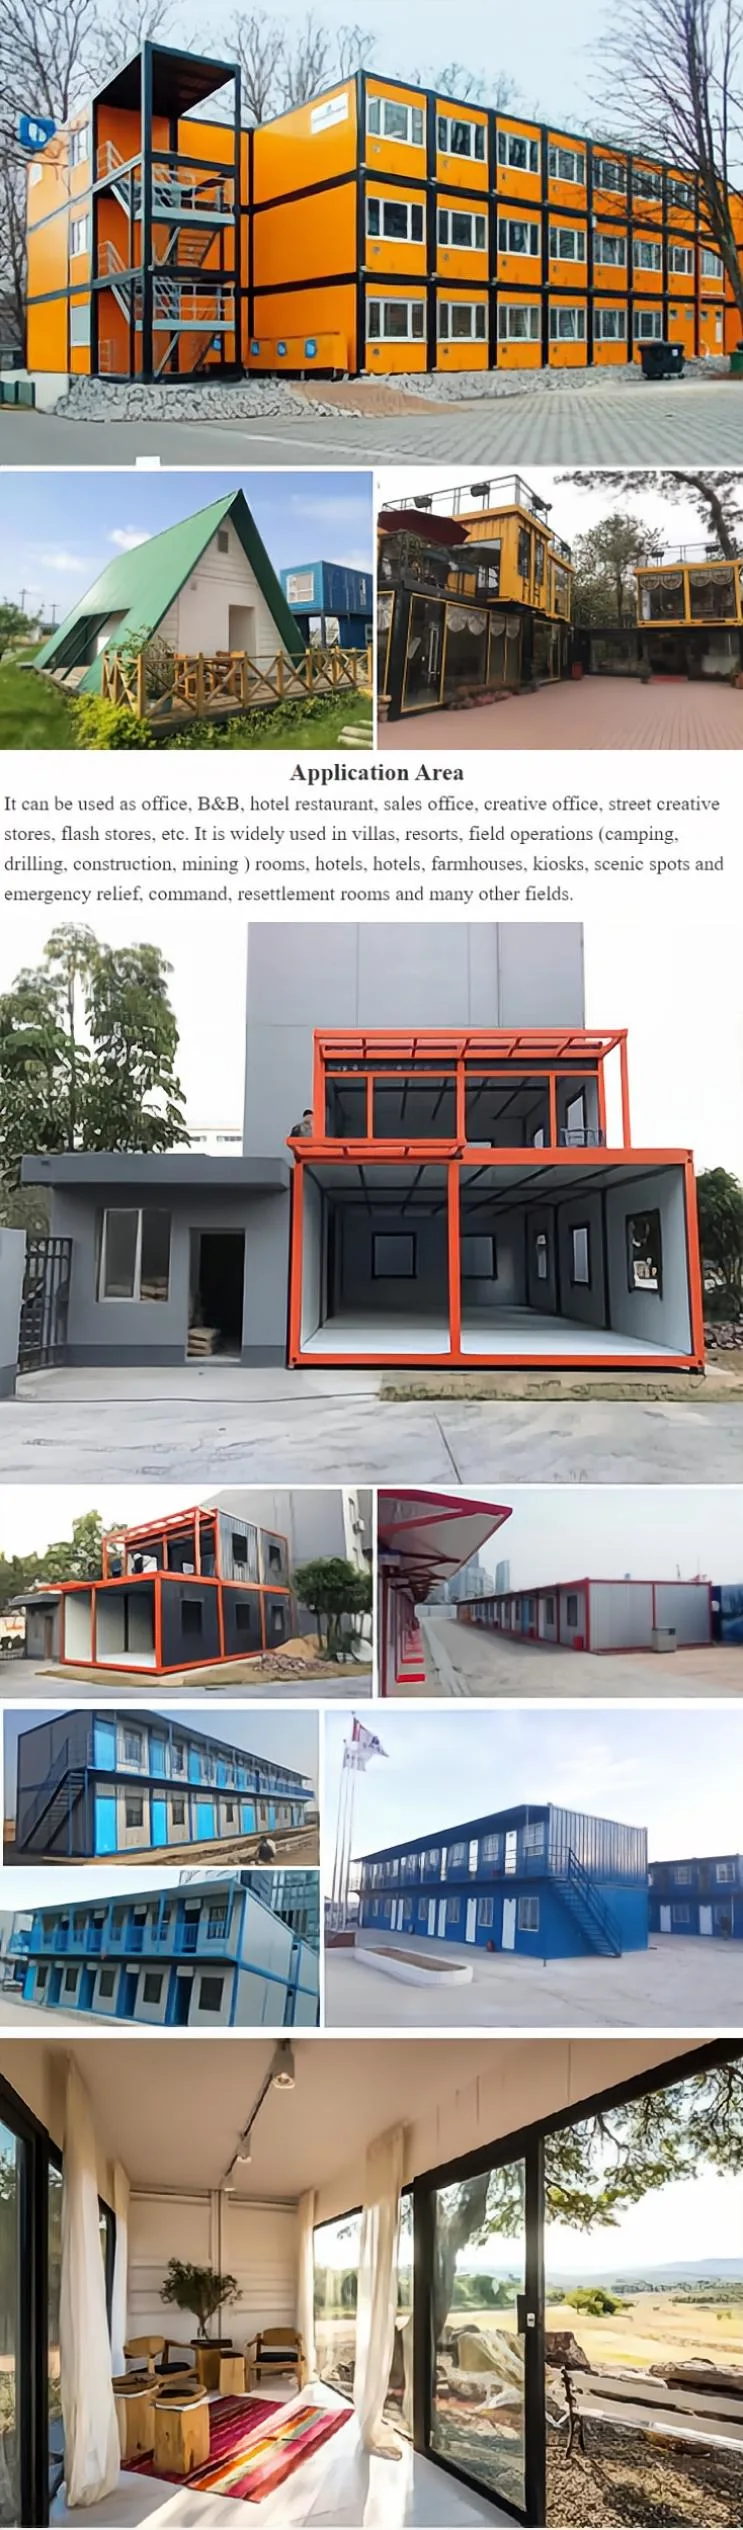 Professional 2 Floor Modern Designed Prefabricated Mobile Modular Homes Prefab Container House with Decoration